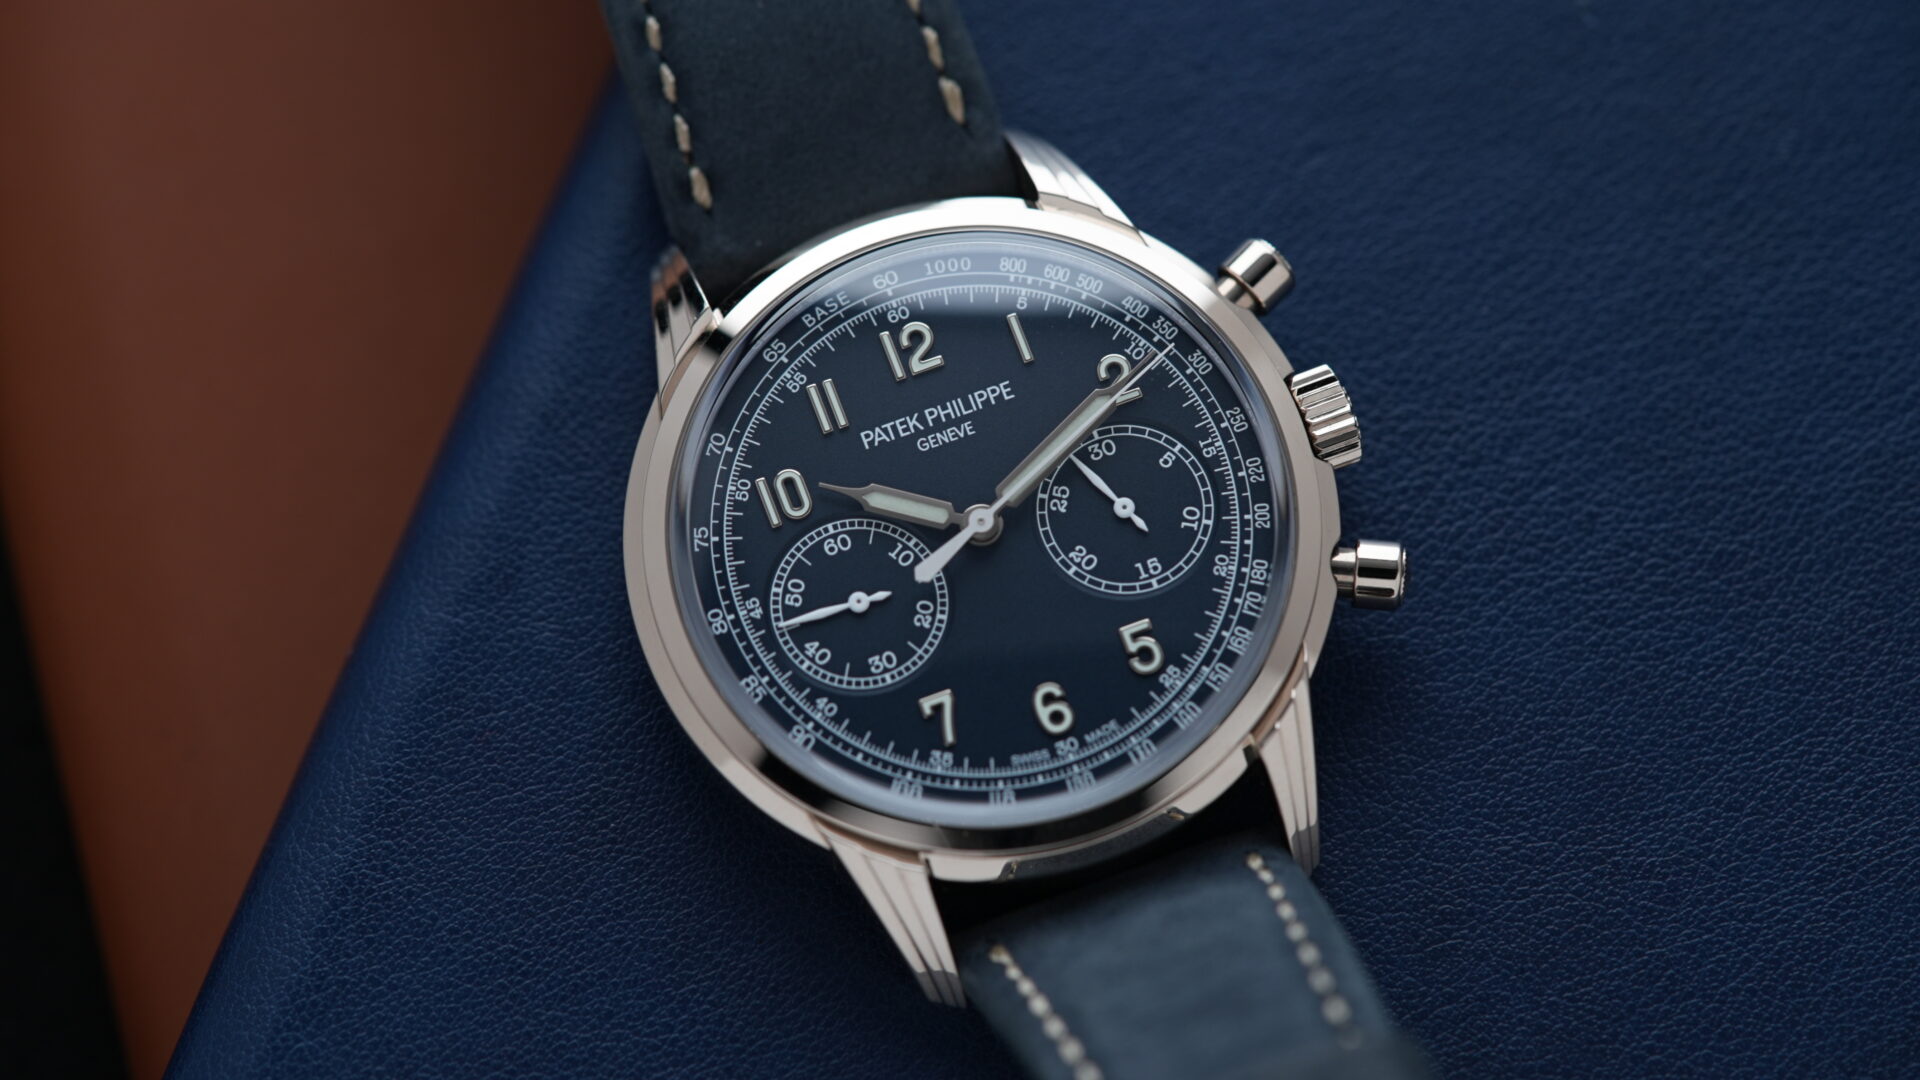 Patek Philippe Chronograph 5172 Complications Chronograph Recently Serviced Seal 5172G-001 White Gold watch displayed on blue leather under white lighting.